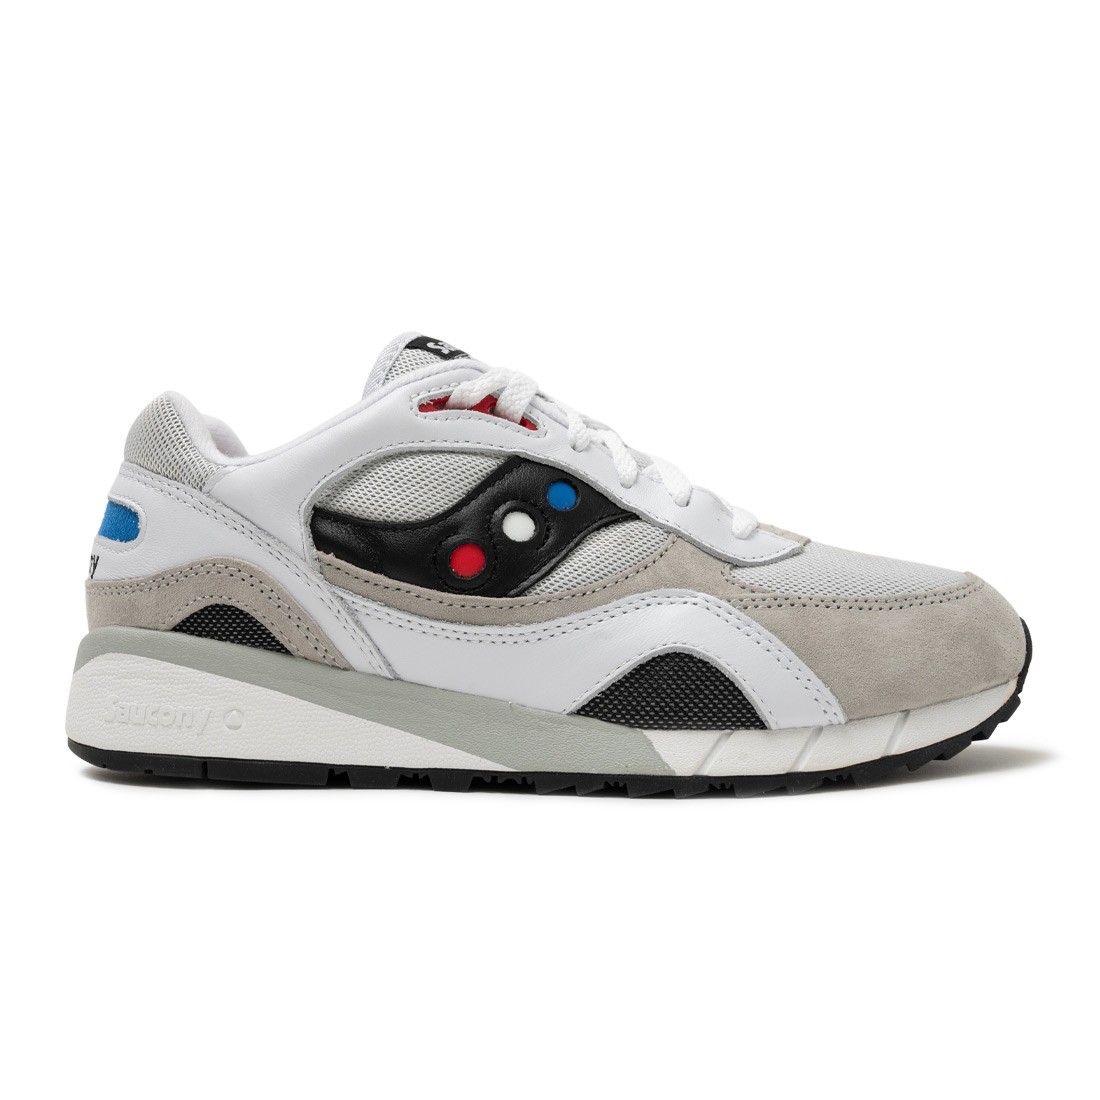 Saucony x Extra Butter Men Shadow 6000 White Rabbit (white / black / red)